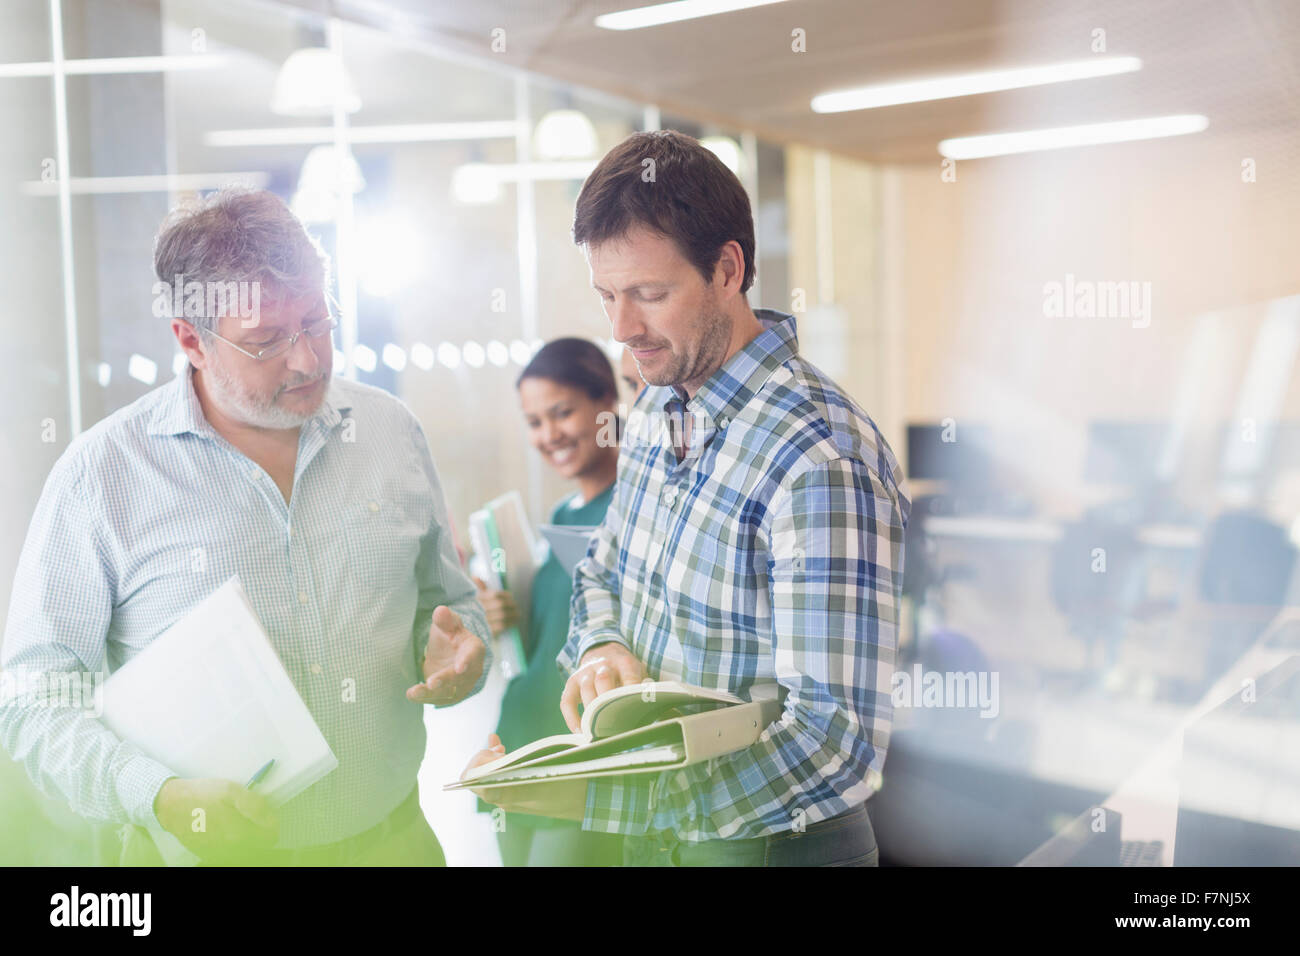 Men discussing book in adult education classroom Stock Photo